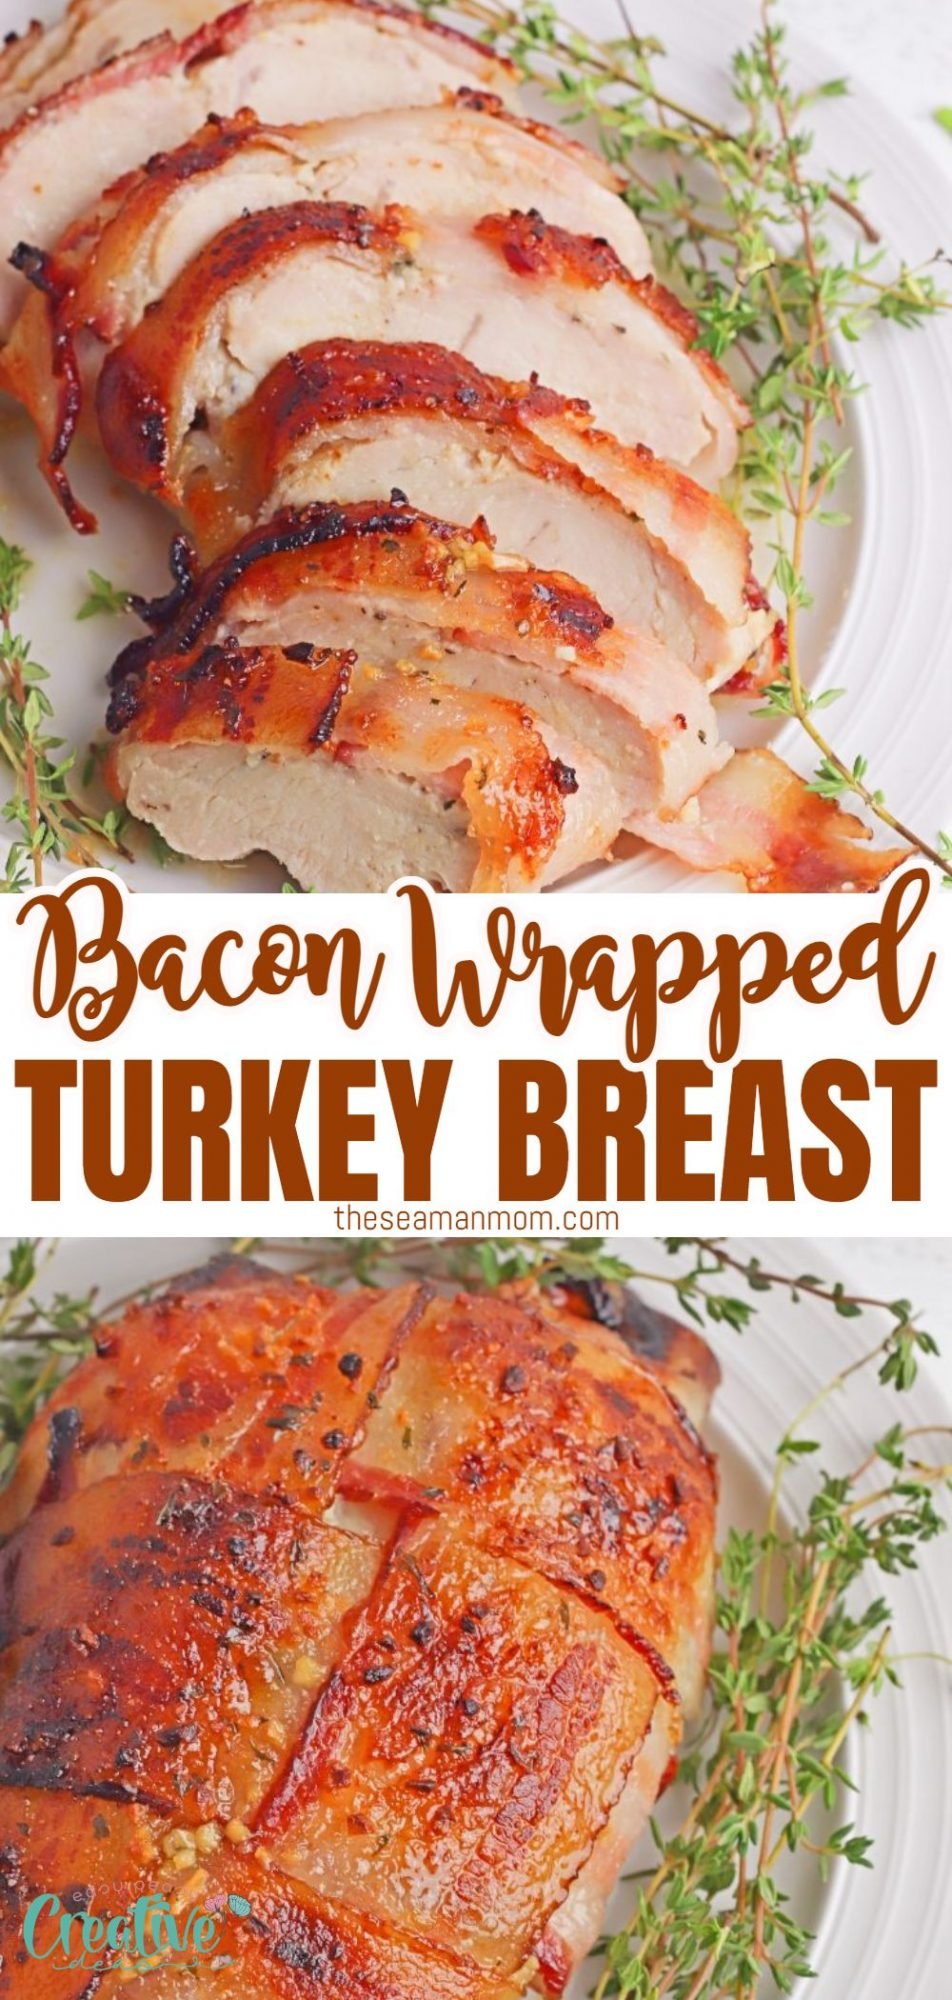 Photo collage of bacon wrapped turkey breast as a whole and sliced on a serving plate